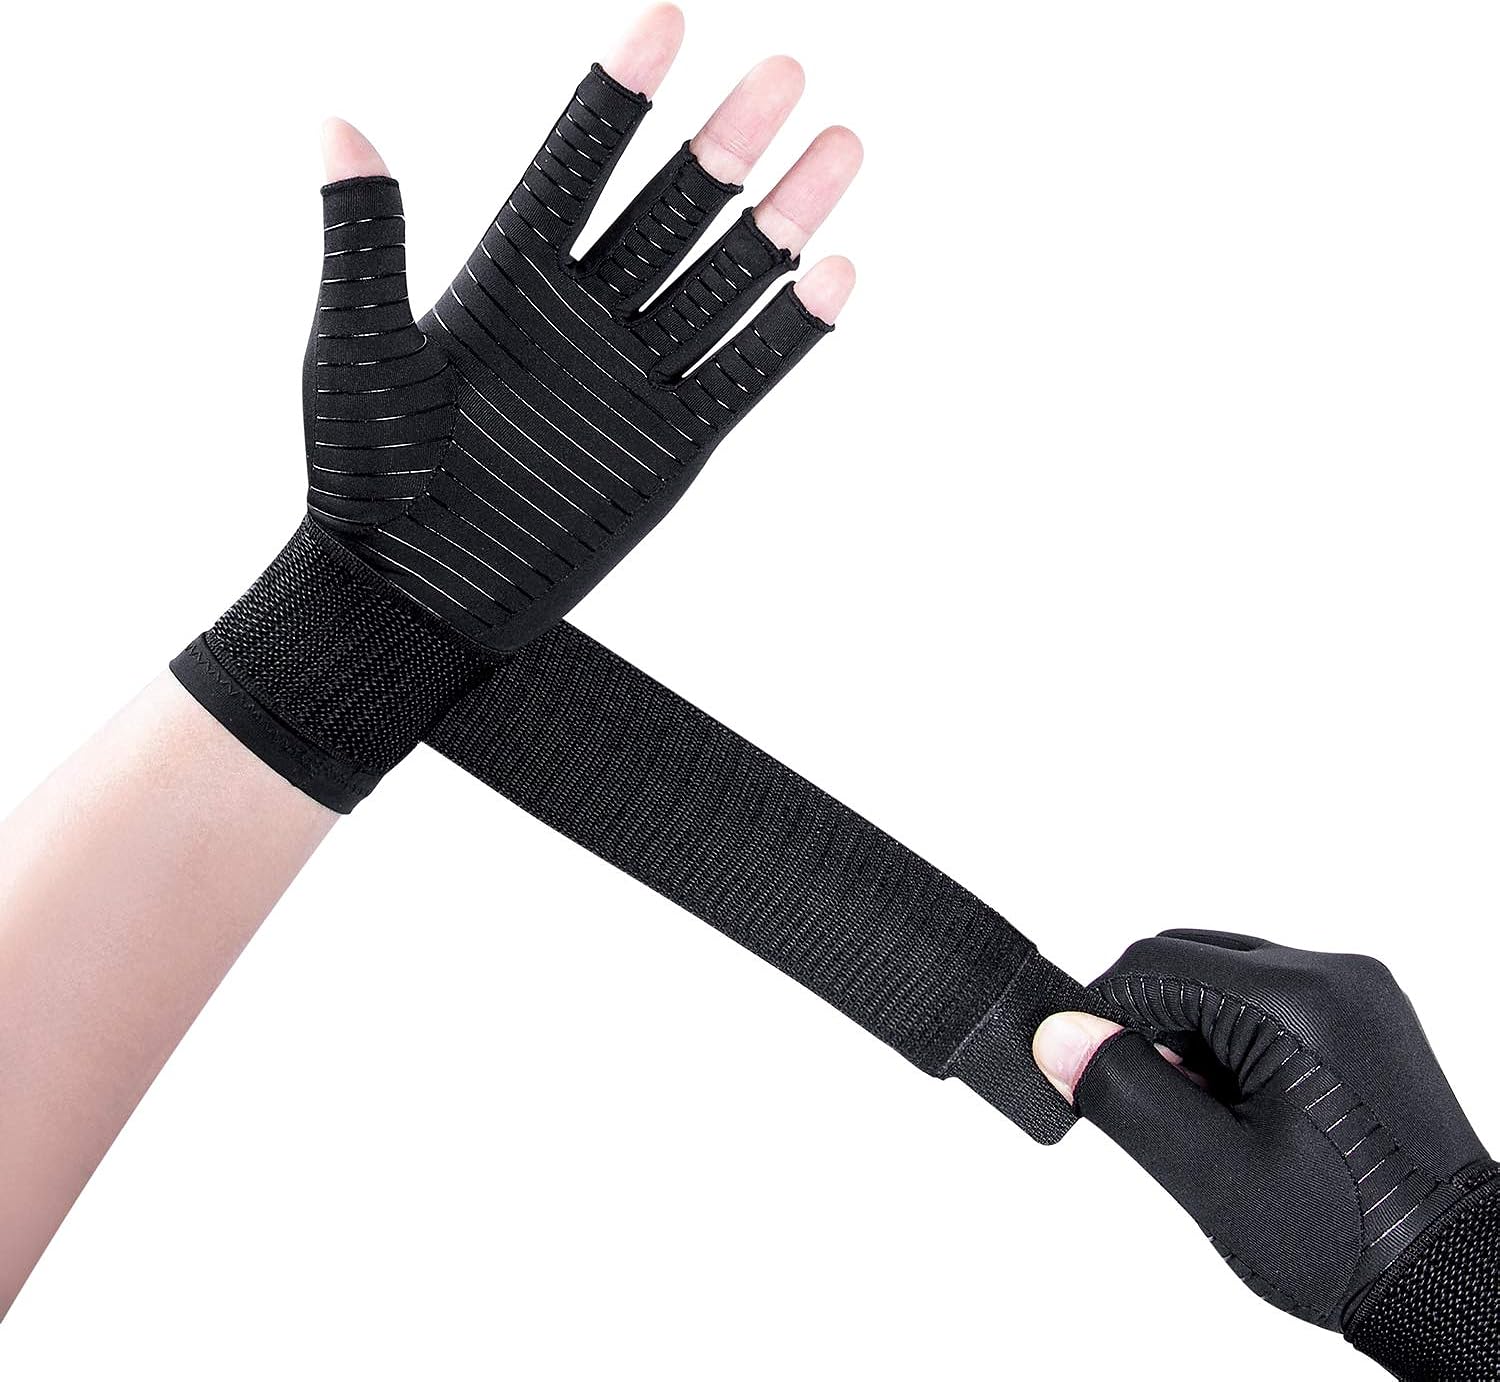 THX4COPPER Compression Arthritis Gloves with Strap,Carpal Tunnel,Typing,Support